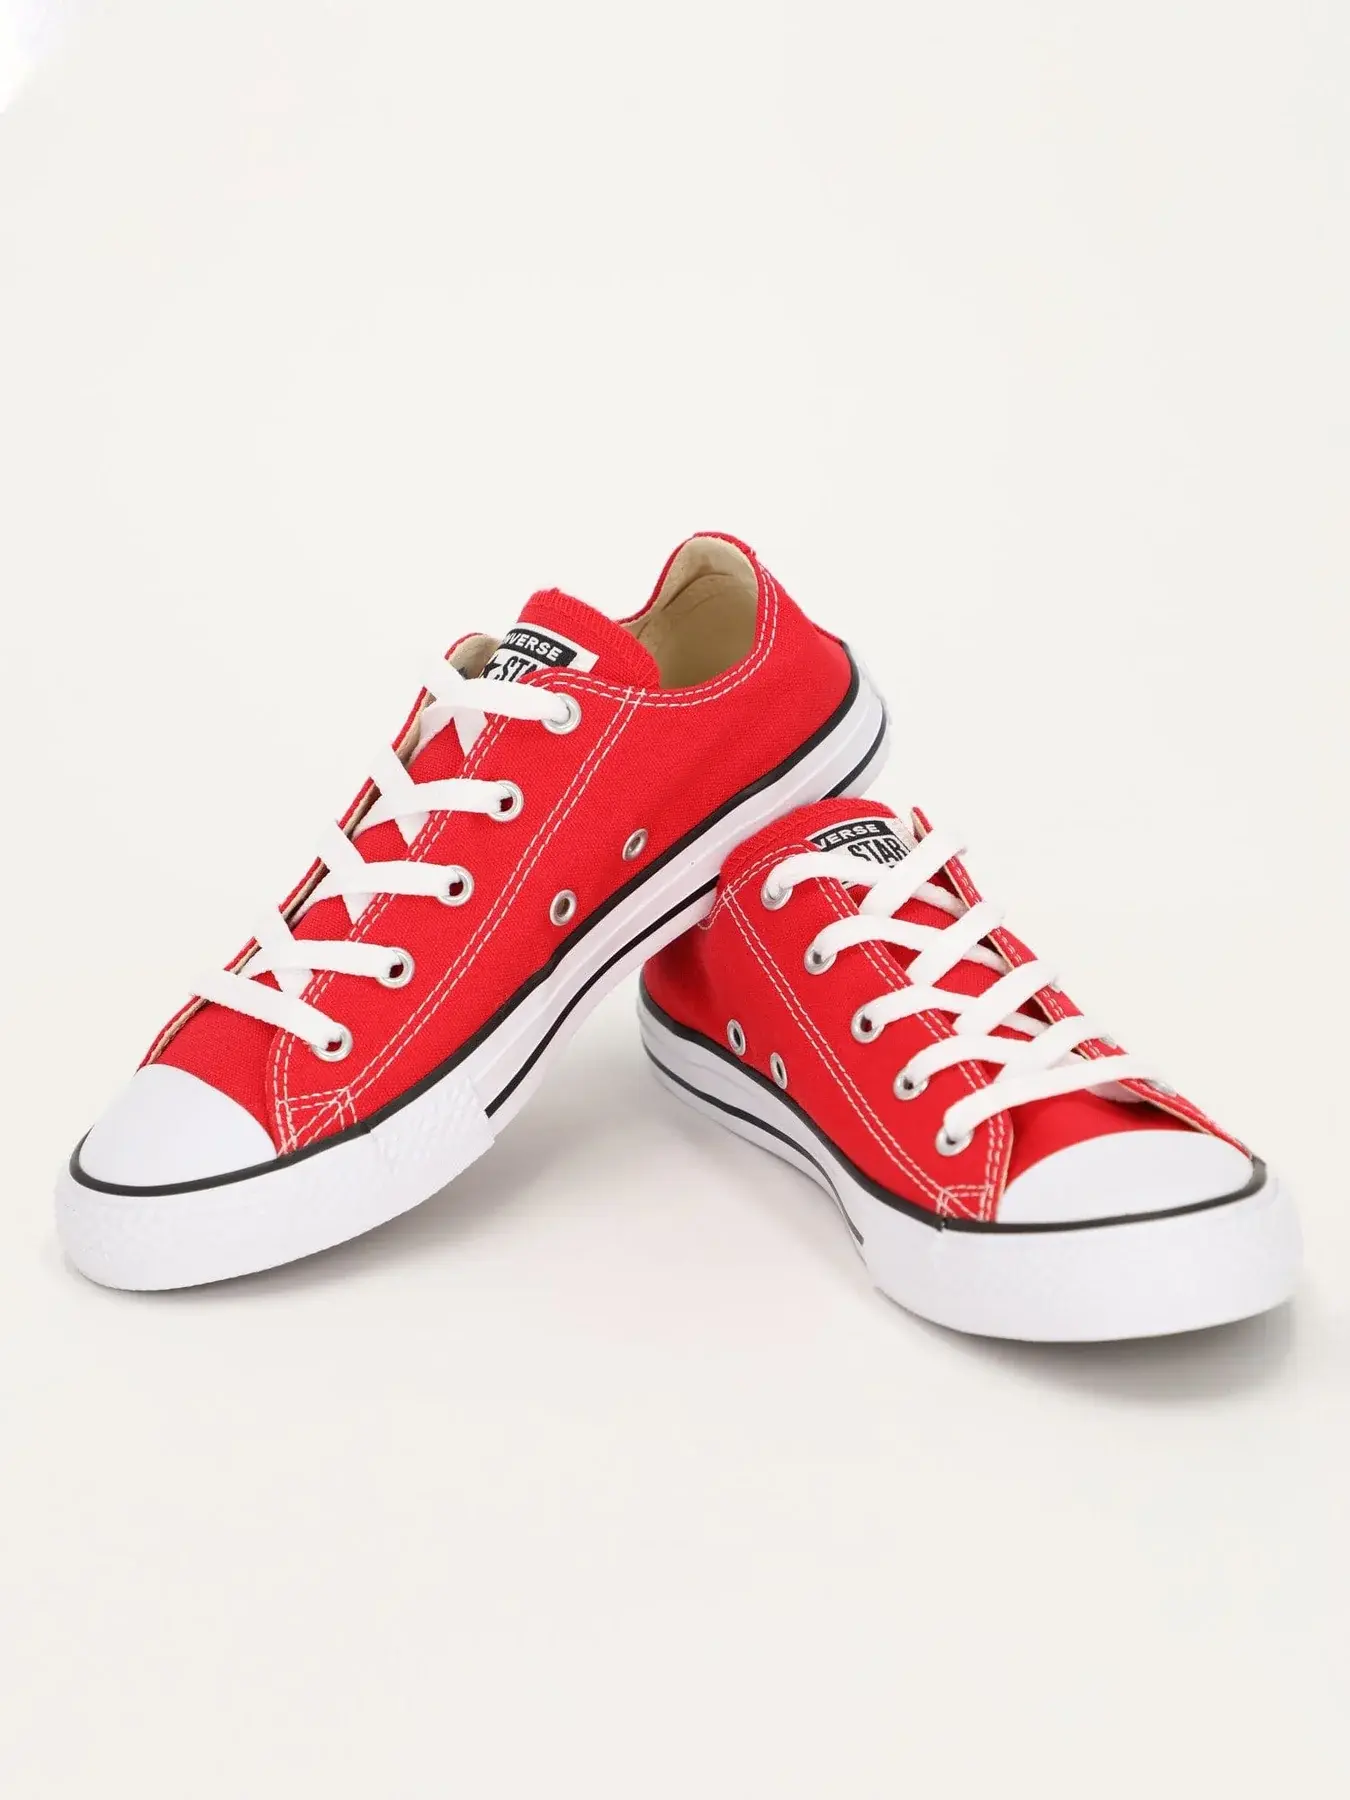 Selected image for Converse Dečije patike Chuck Taylor All Star, Crvene